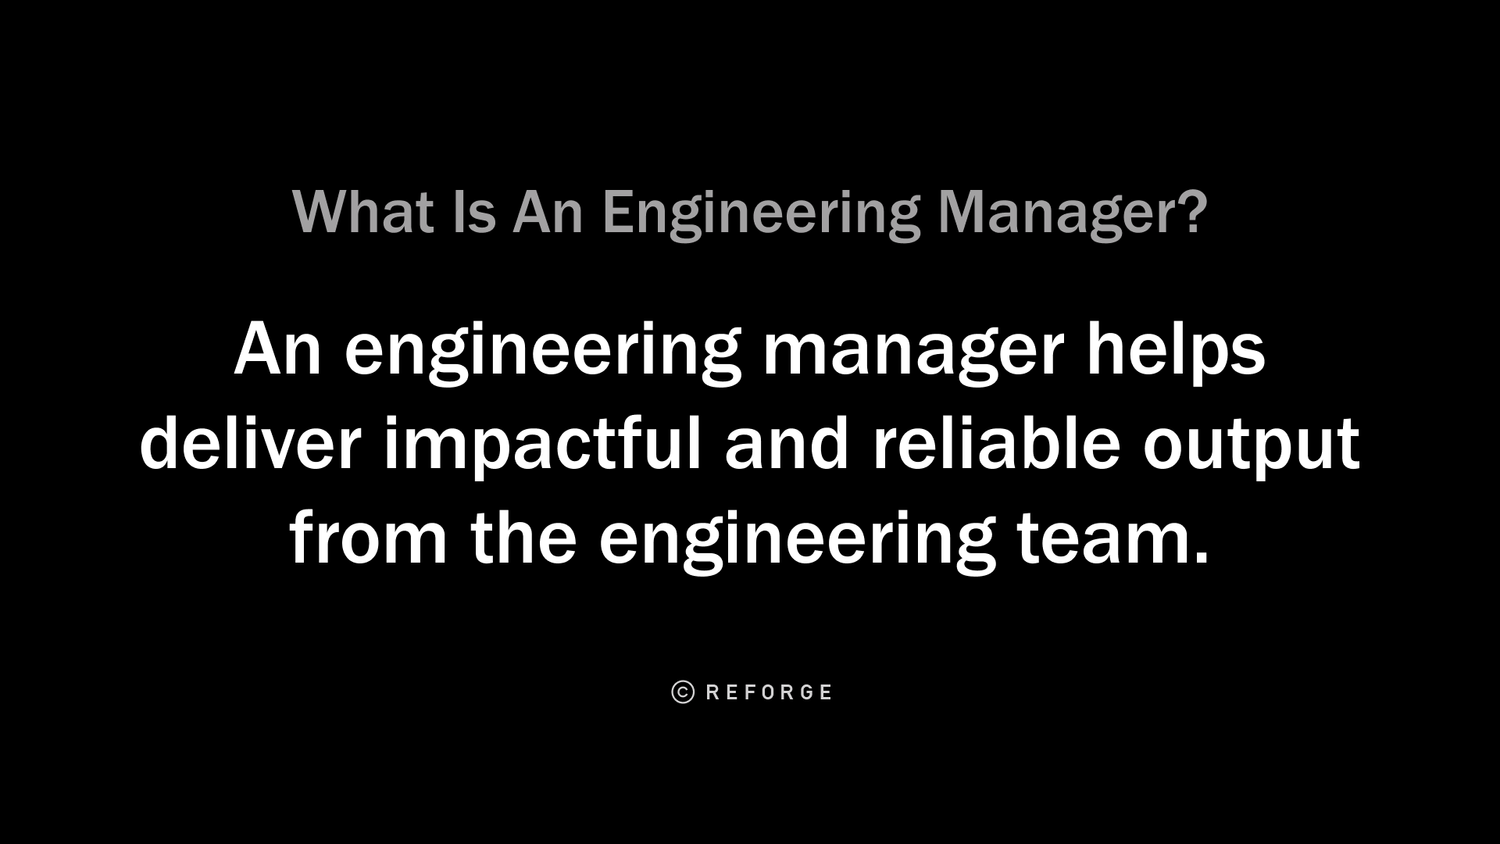 What Is An Engineering Manager?